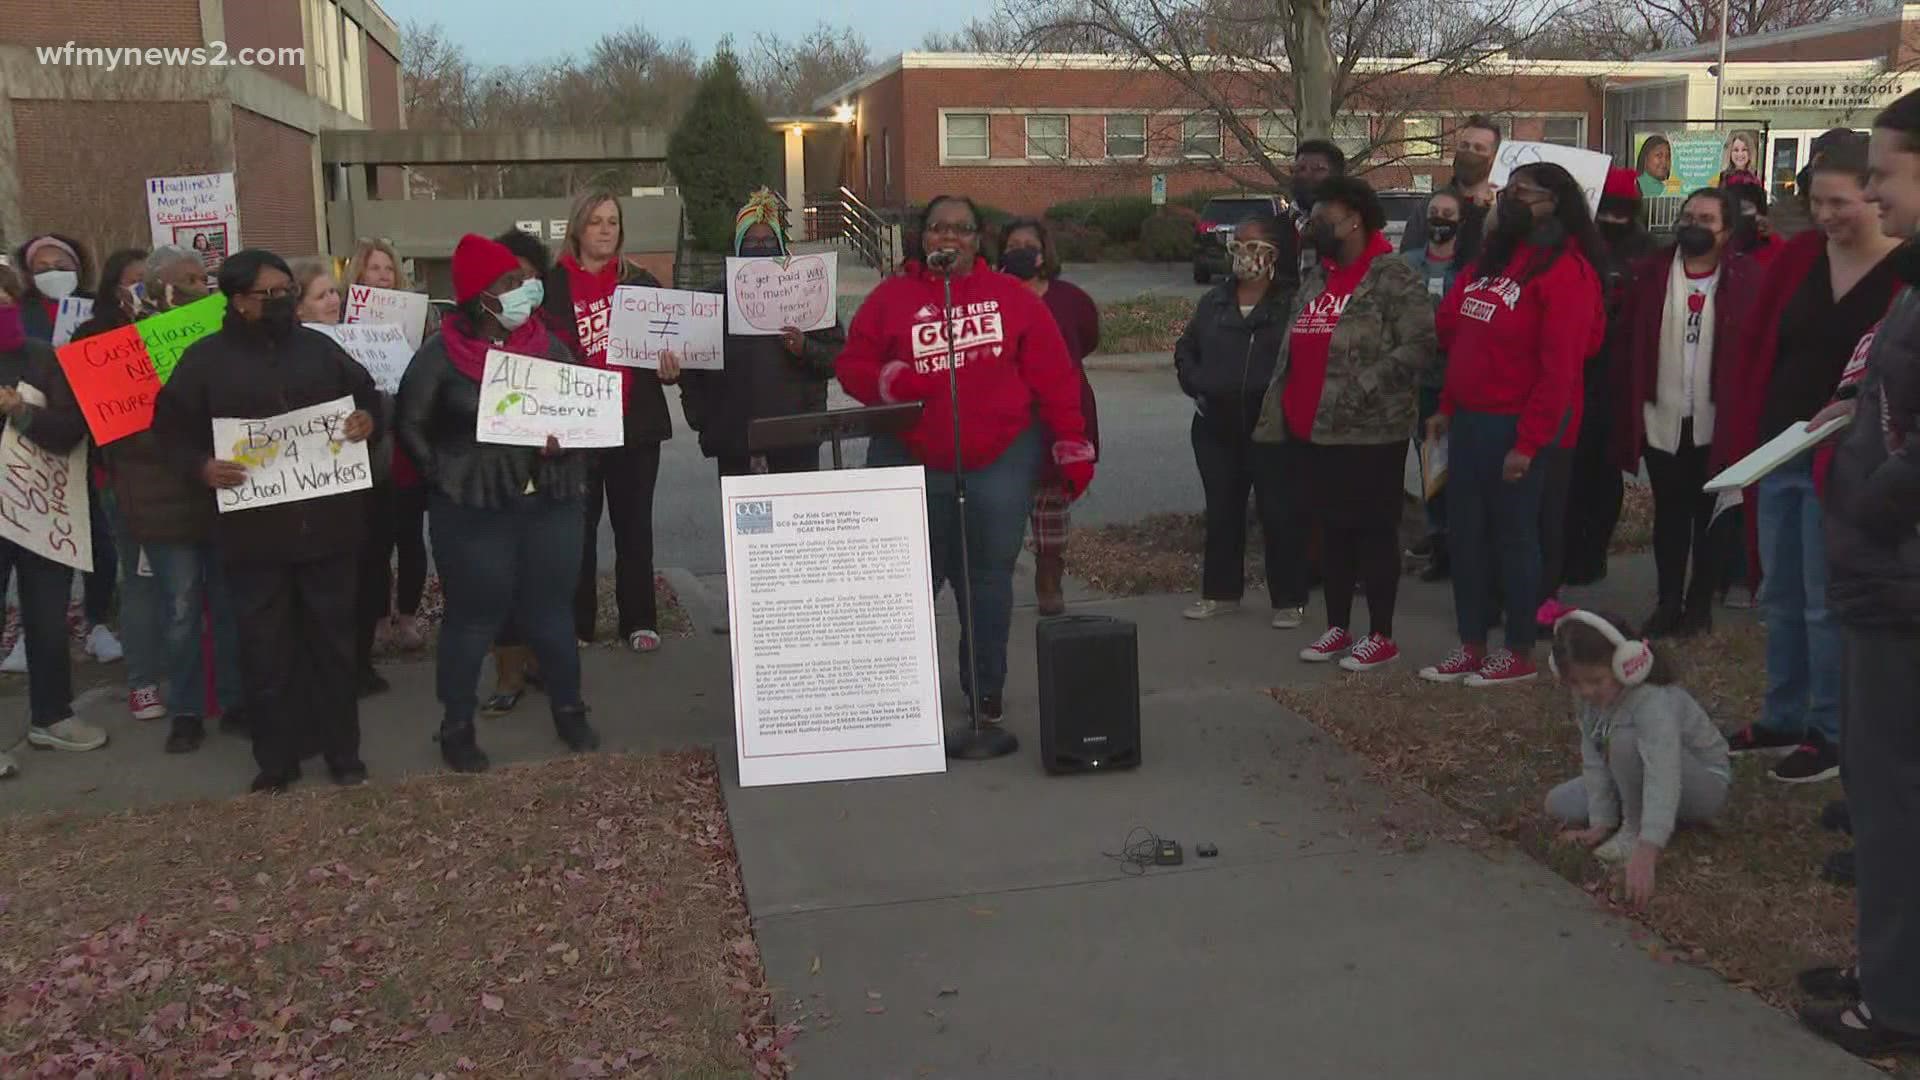 The Guilford County Association of Educators said teachers need more money. State lawmakers recently included $2,800 in teacher bonuses in the state budget.